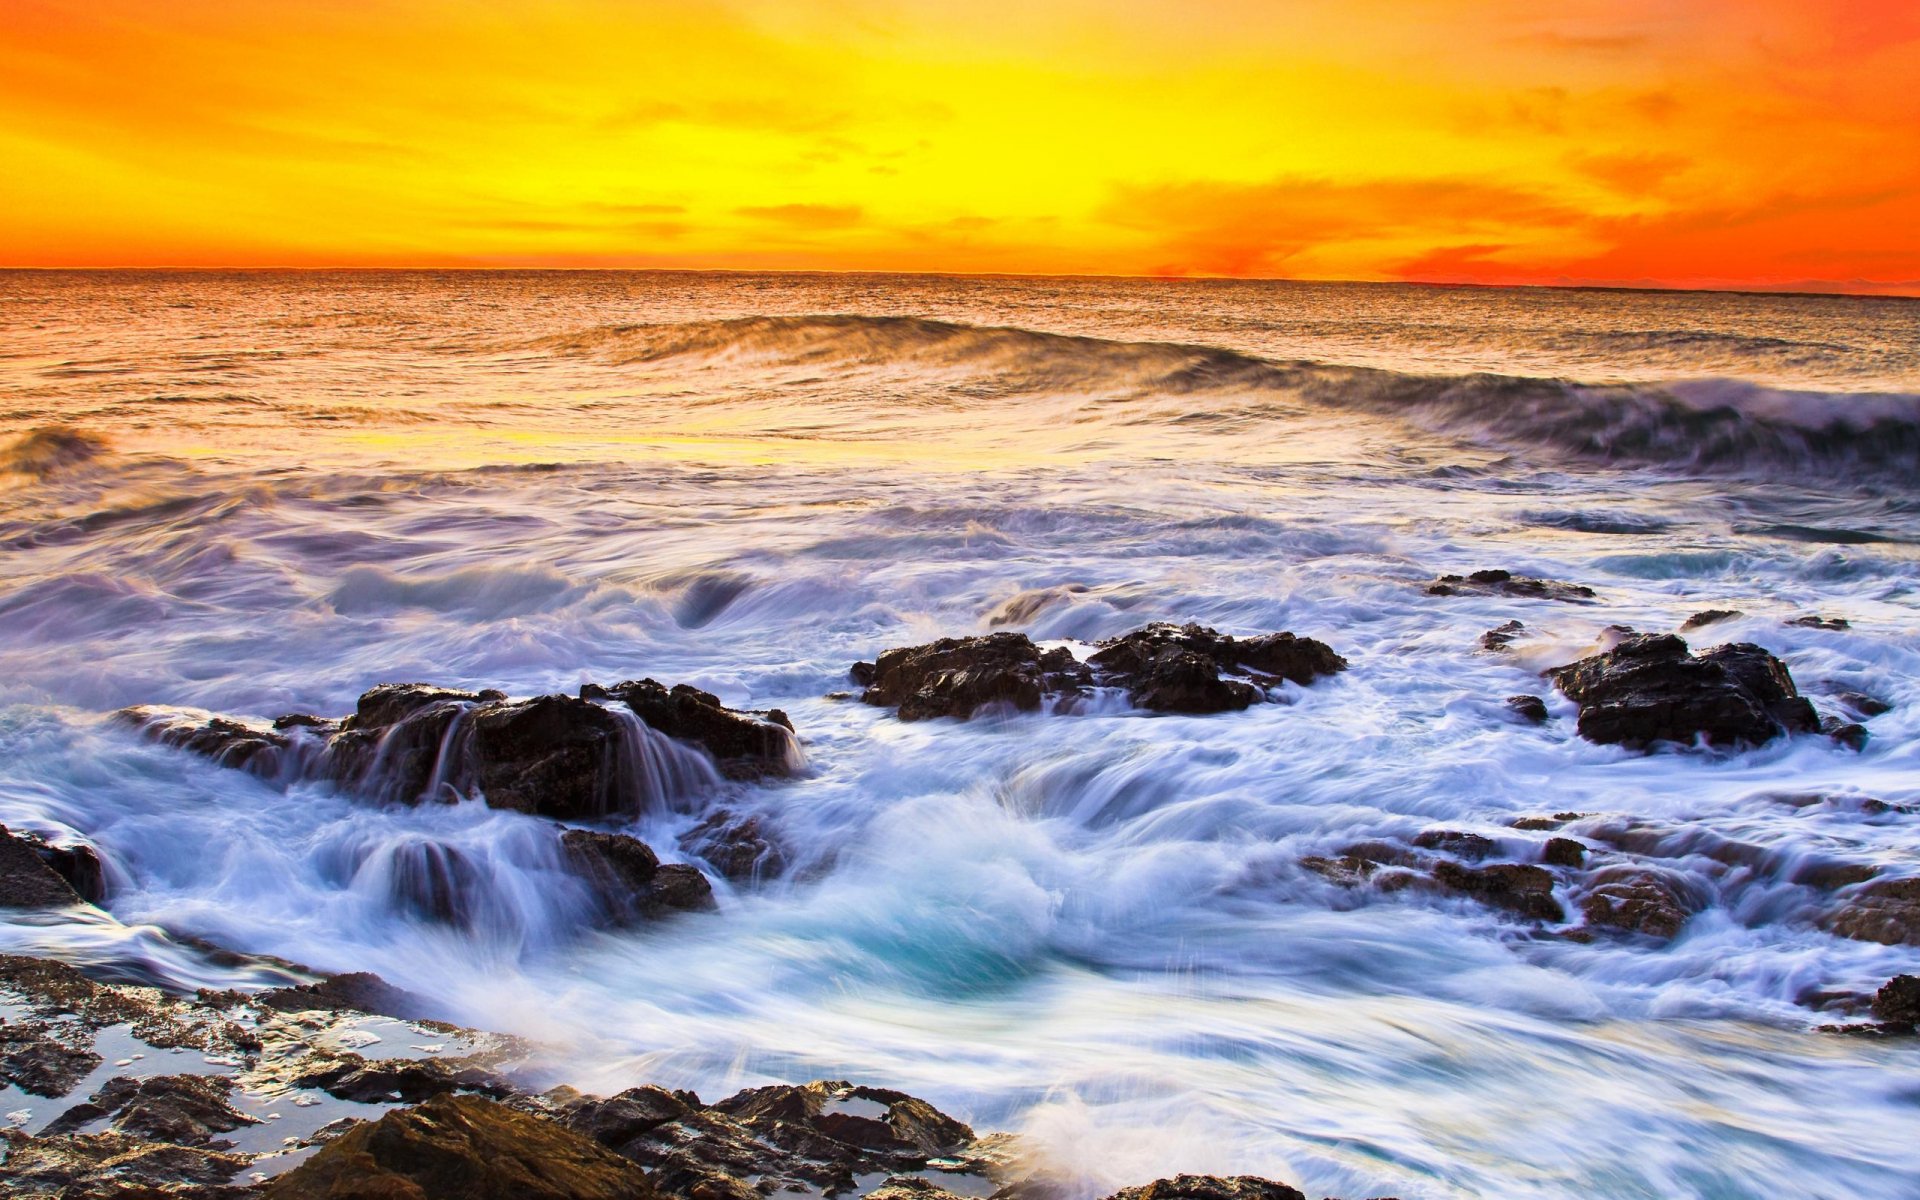 Seascape Full Hd Wallpaper And Background Image 2560x1600 Id232236